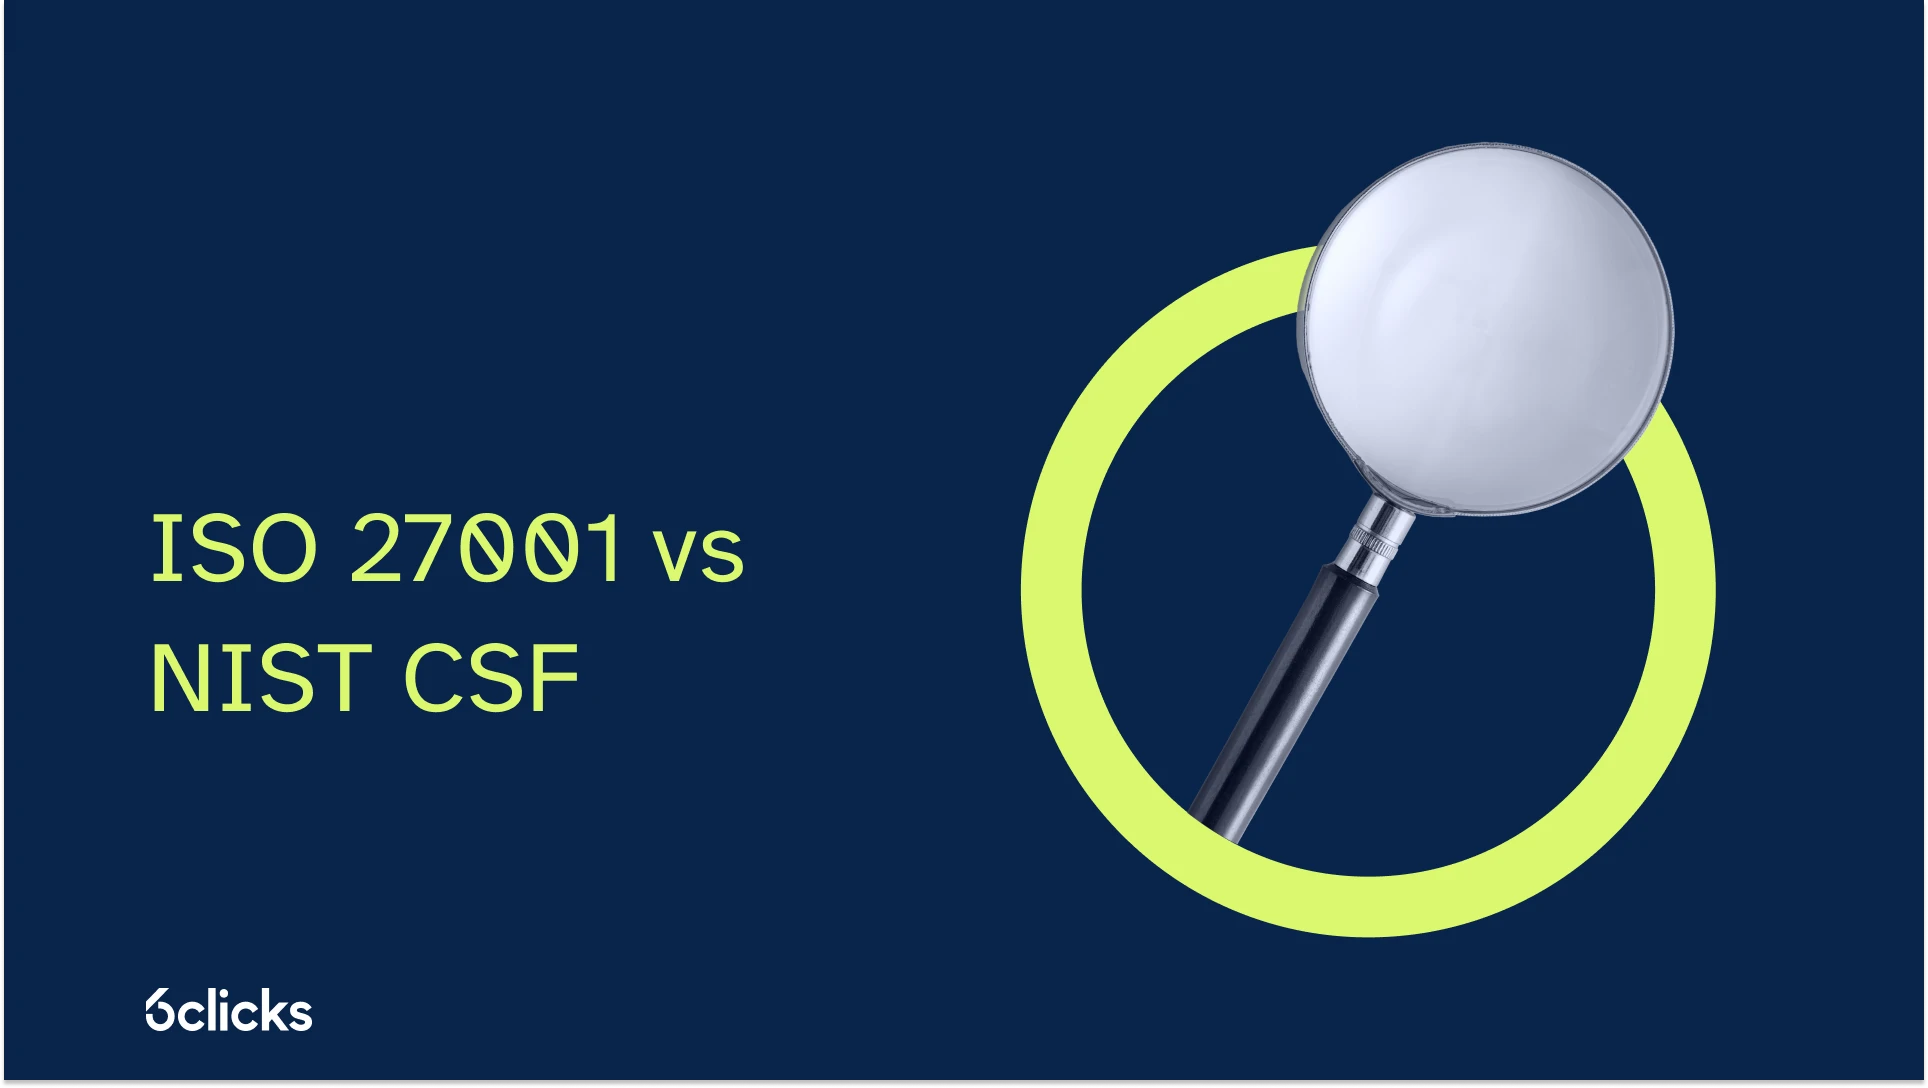 ISO 27001 vs NIST CSF: The Definitive Guide